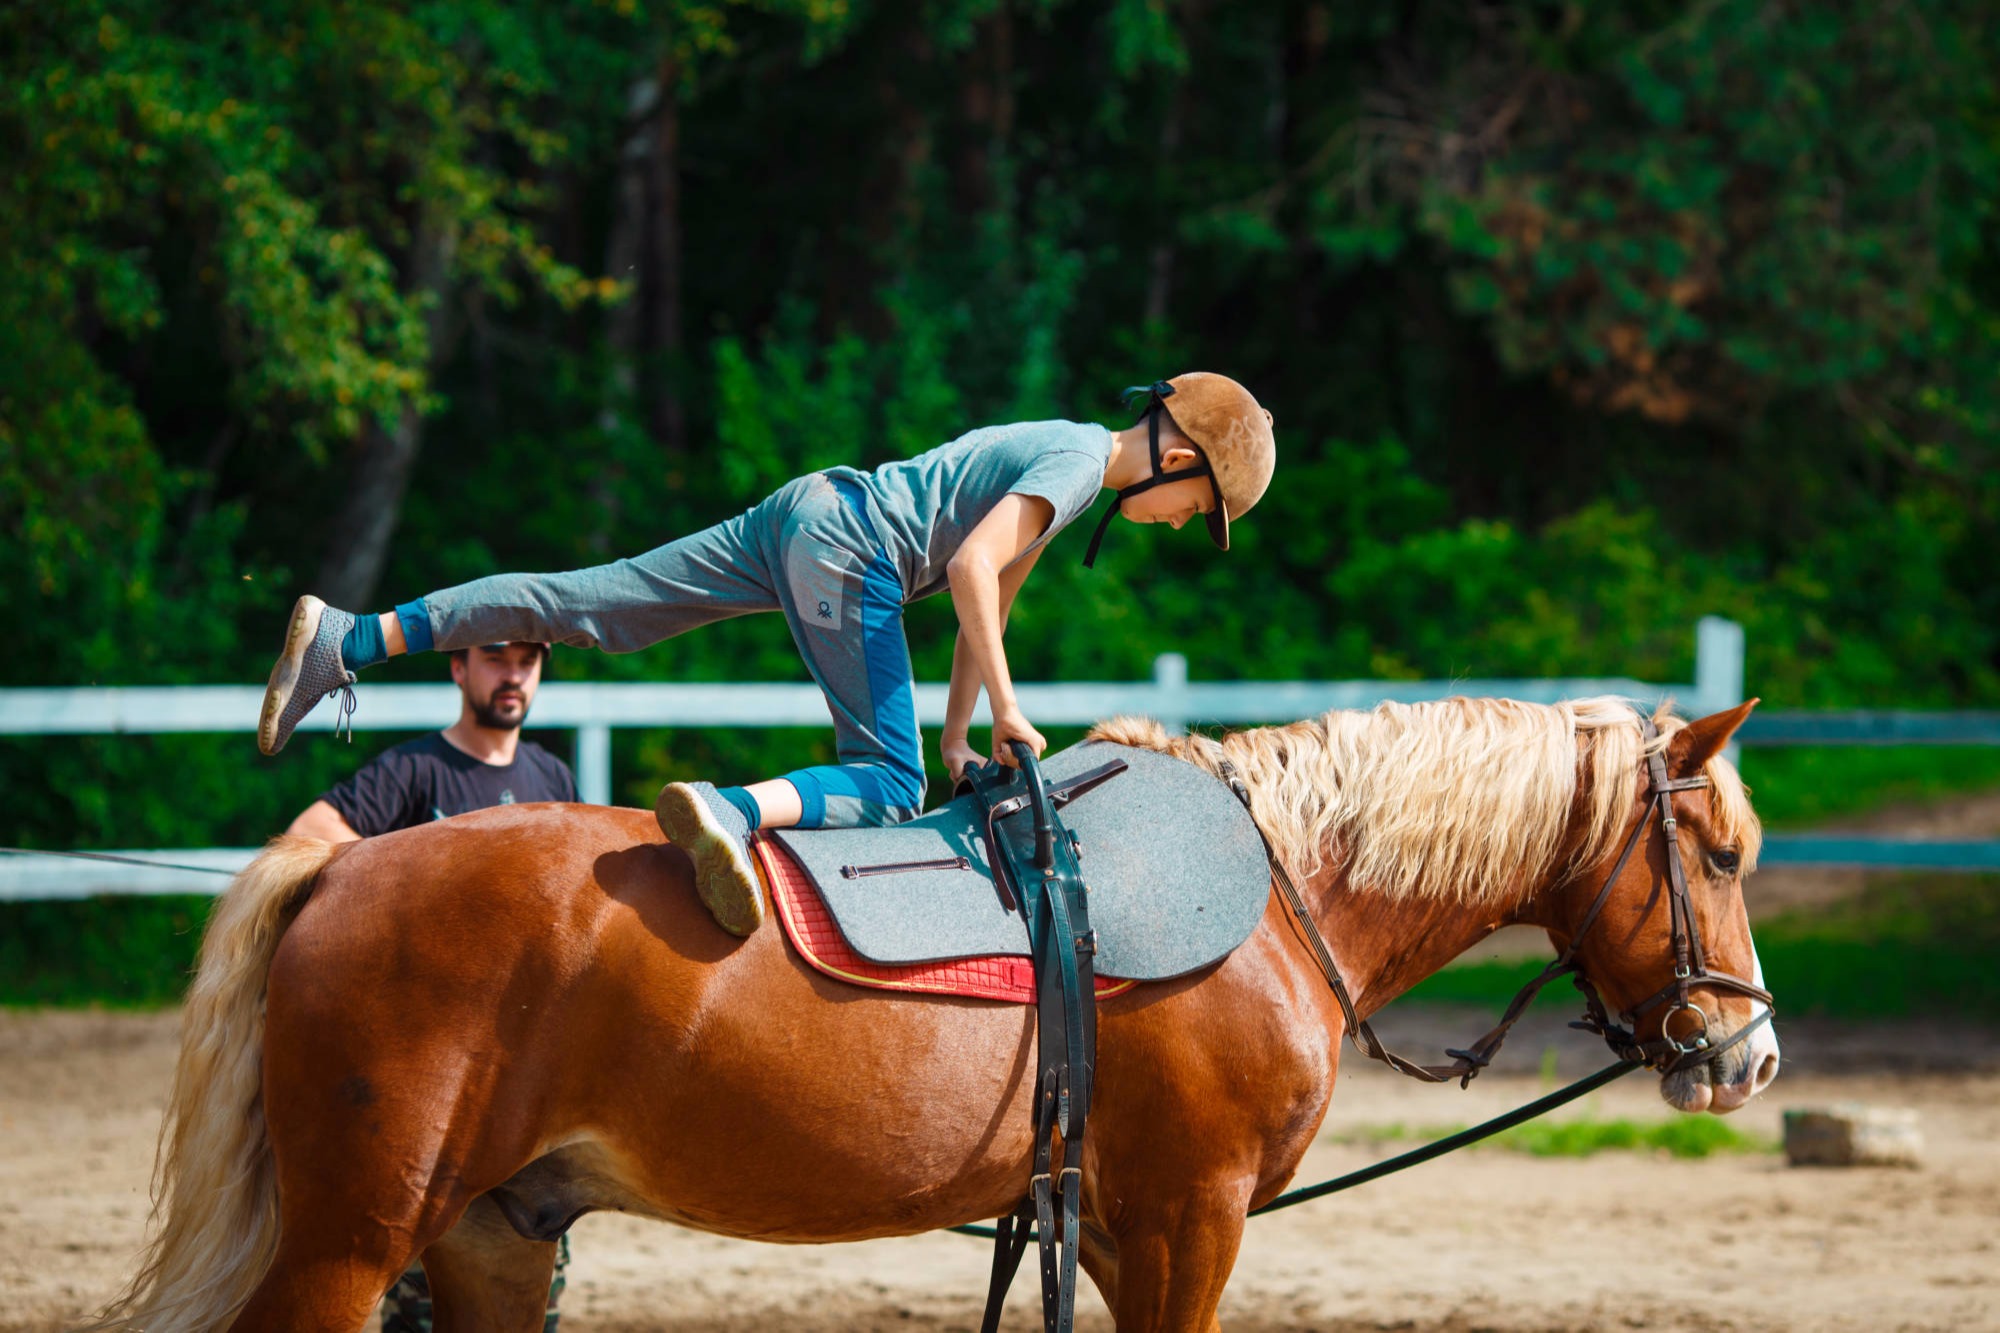 horseback riding (including theory and horse care)